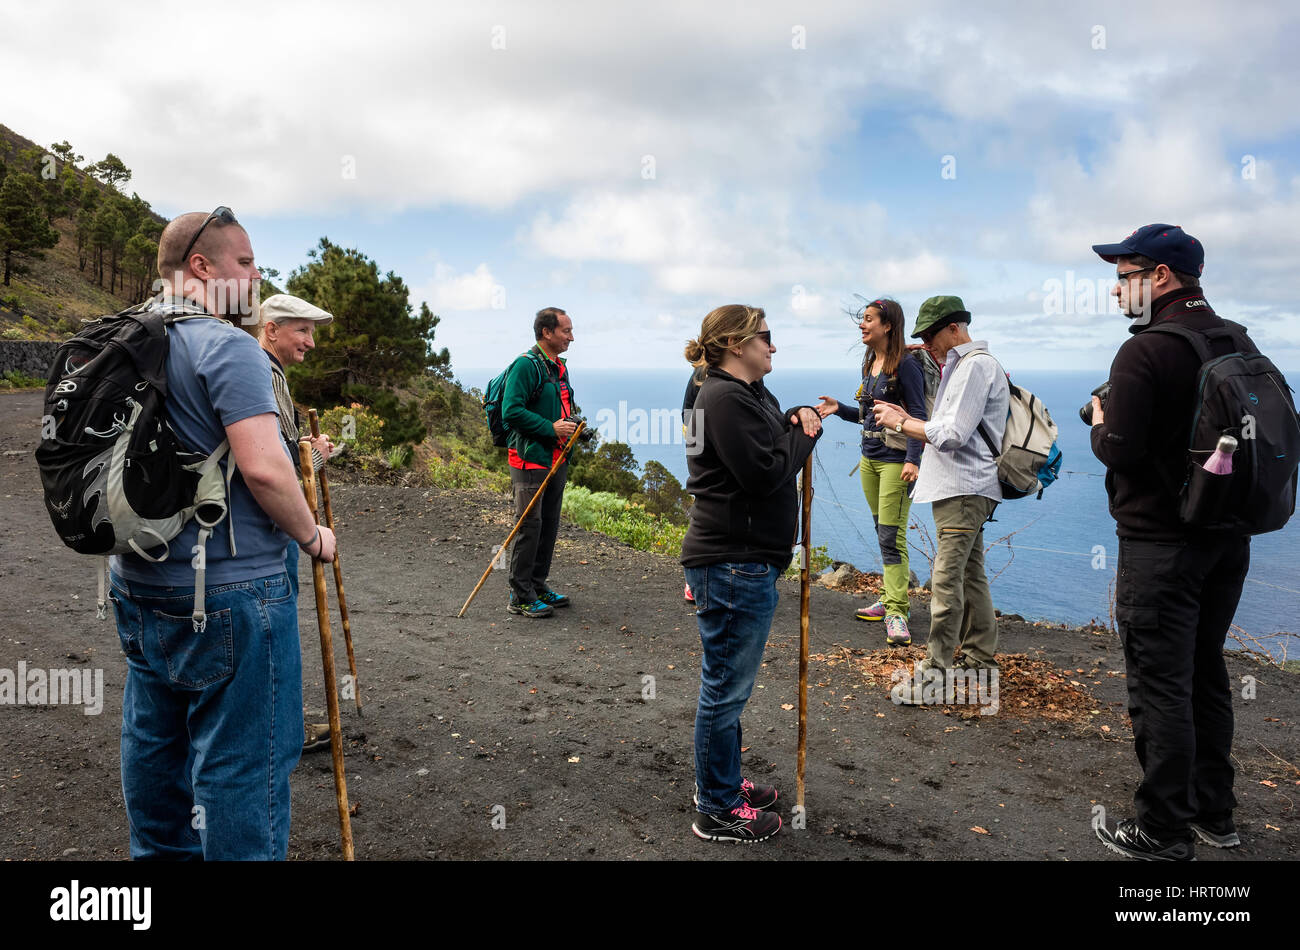 Hiking Trail in Fuencaliente. La Palma.   The tourists stop to enjoy the views from the mountain side looking out to the sea.  It's a bright hazy day with fast moving clouds. Stock Photo